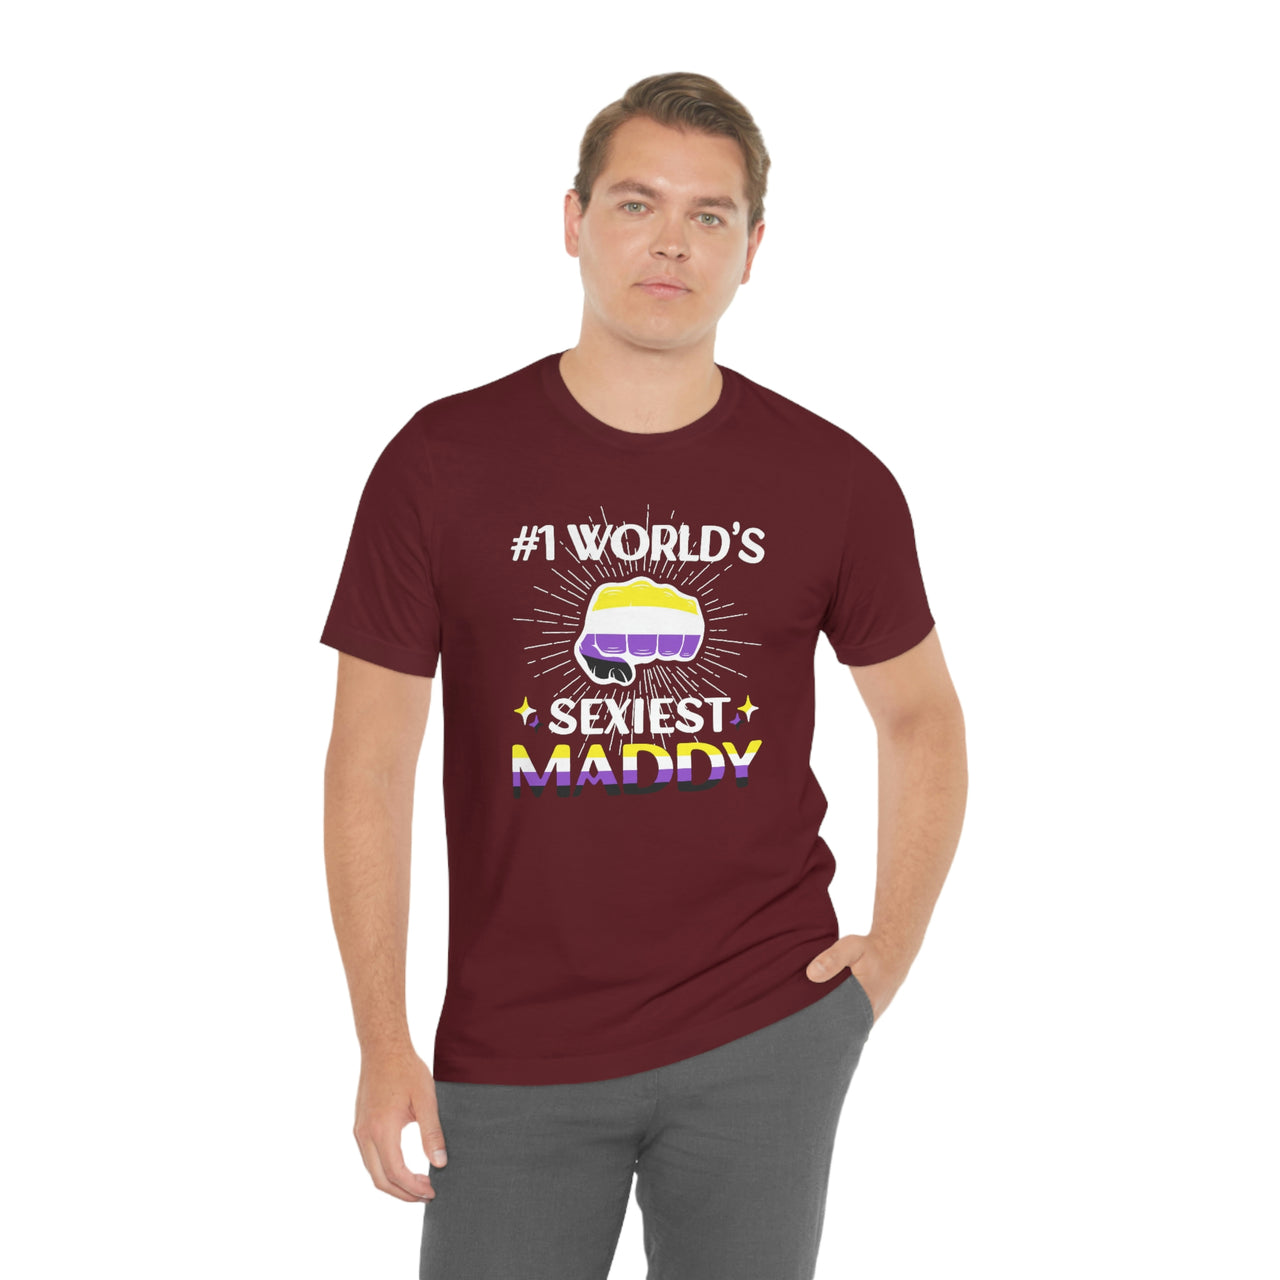 Nonbinary Pride Flag Mother's Day Unisex Short Sleeve Tee - #1 World's Gayest Mom SHAVA CO